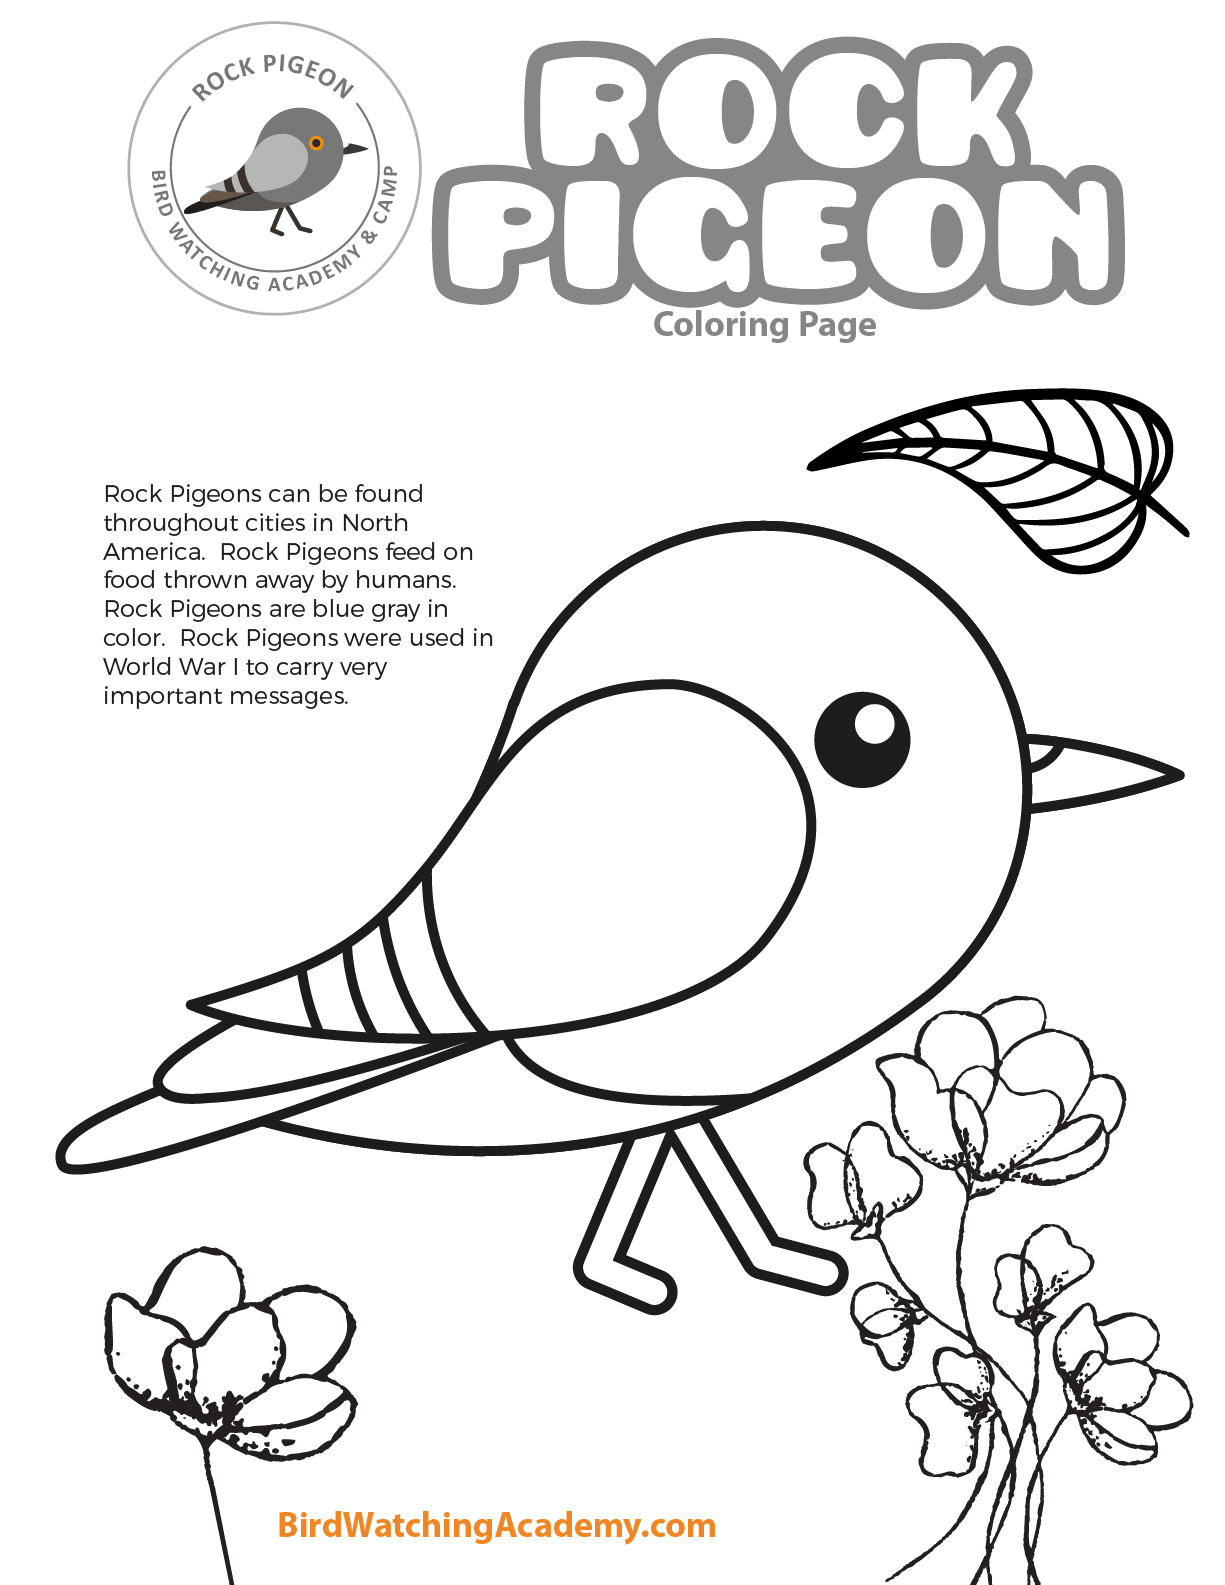 Rock pigeon coloring page